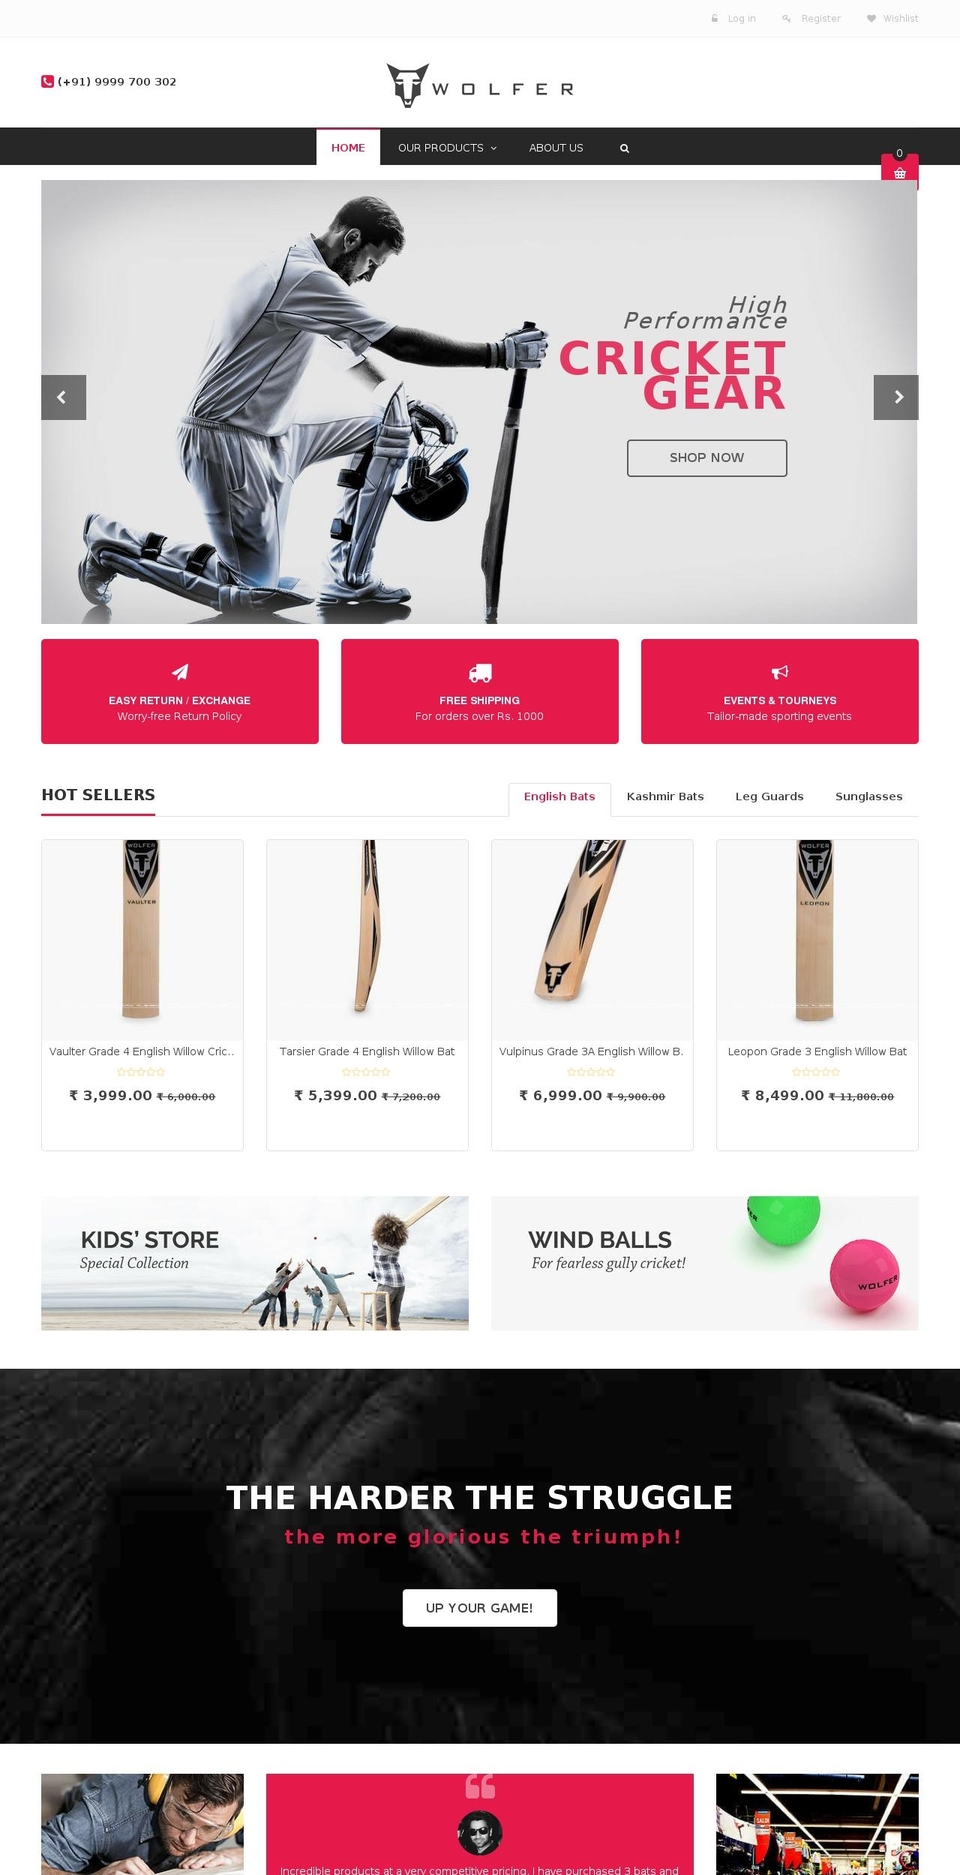 everything-fashionclean-r40 Shopify theme site example wolfersports.com